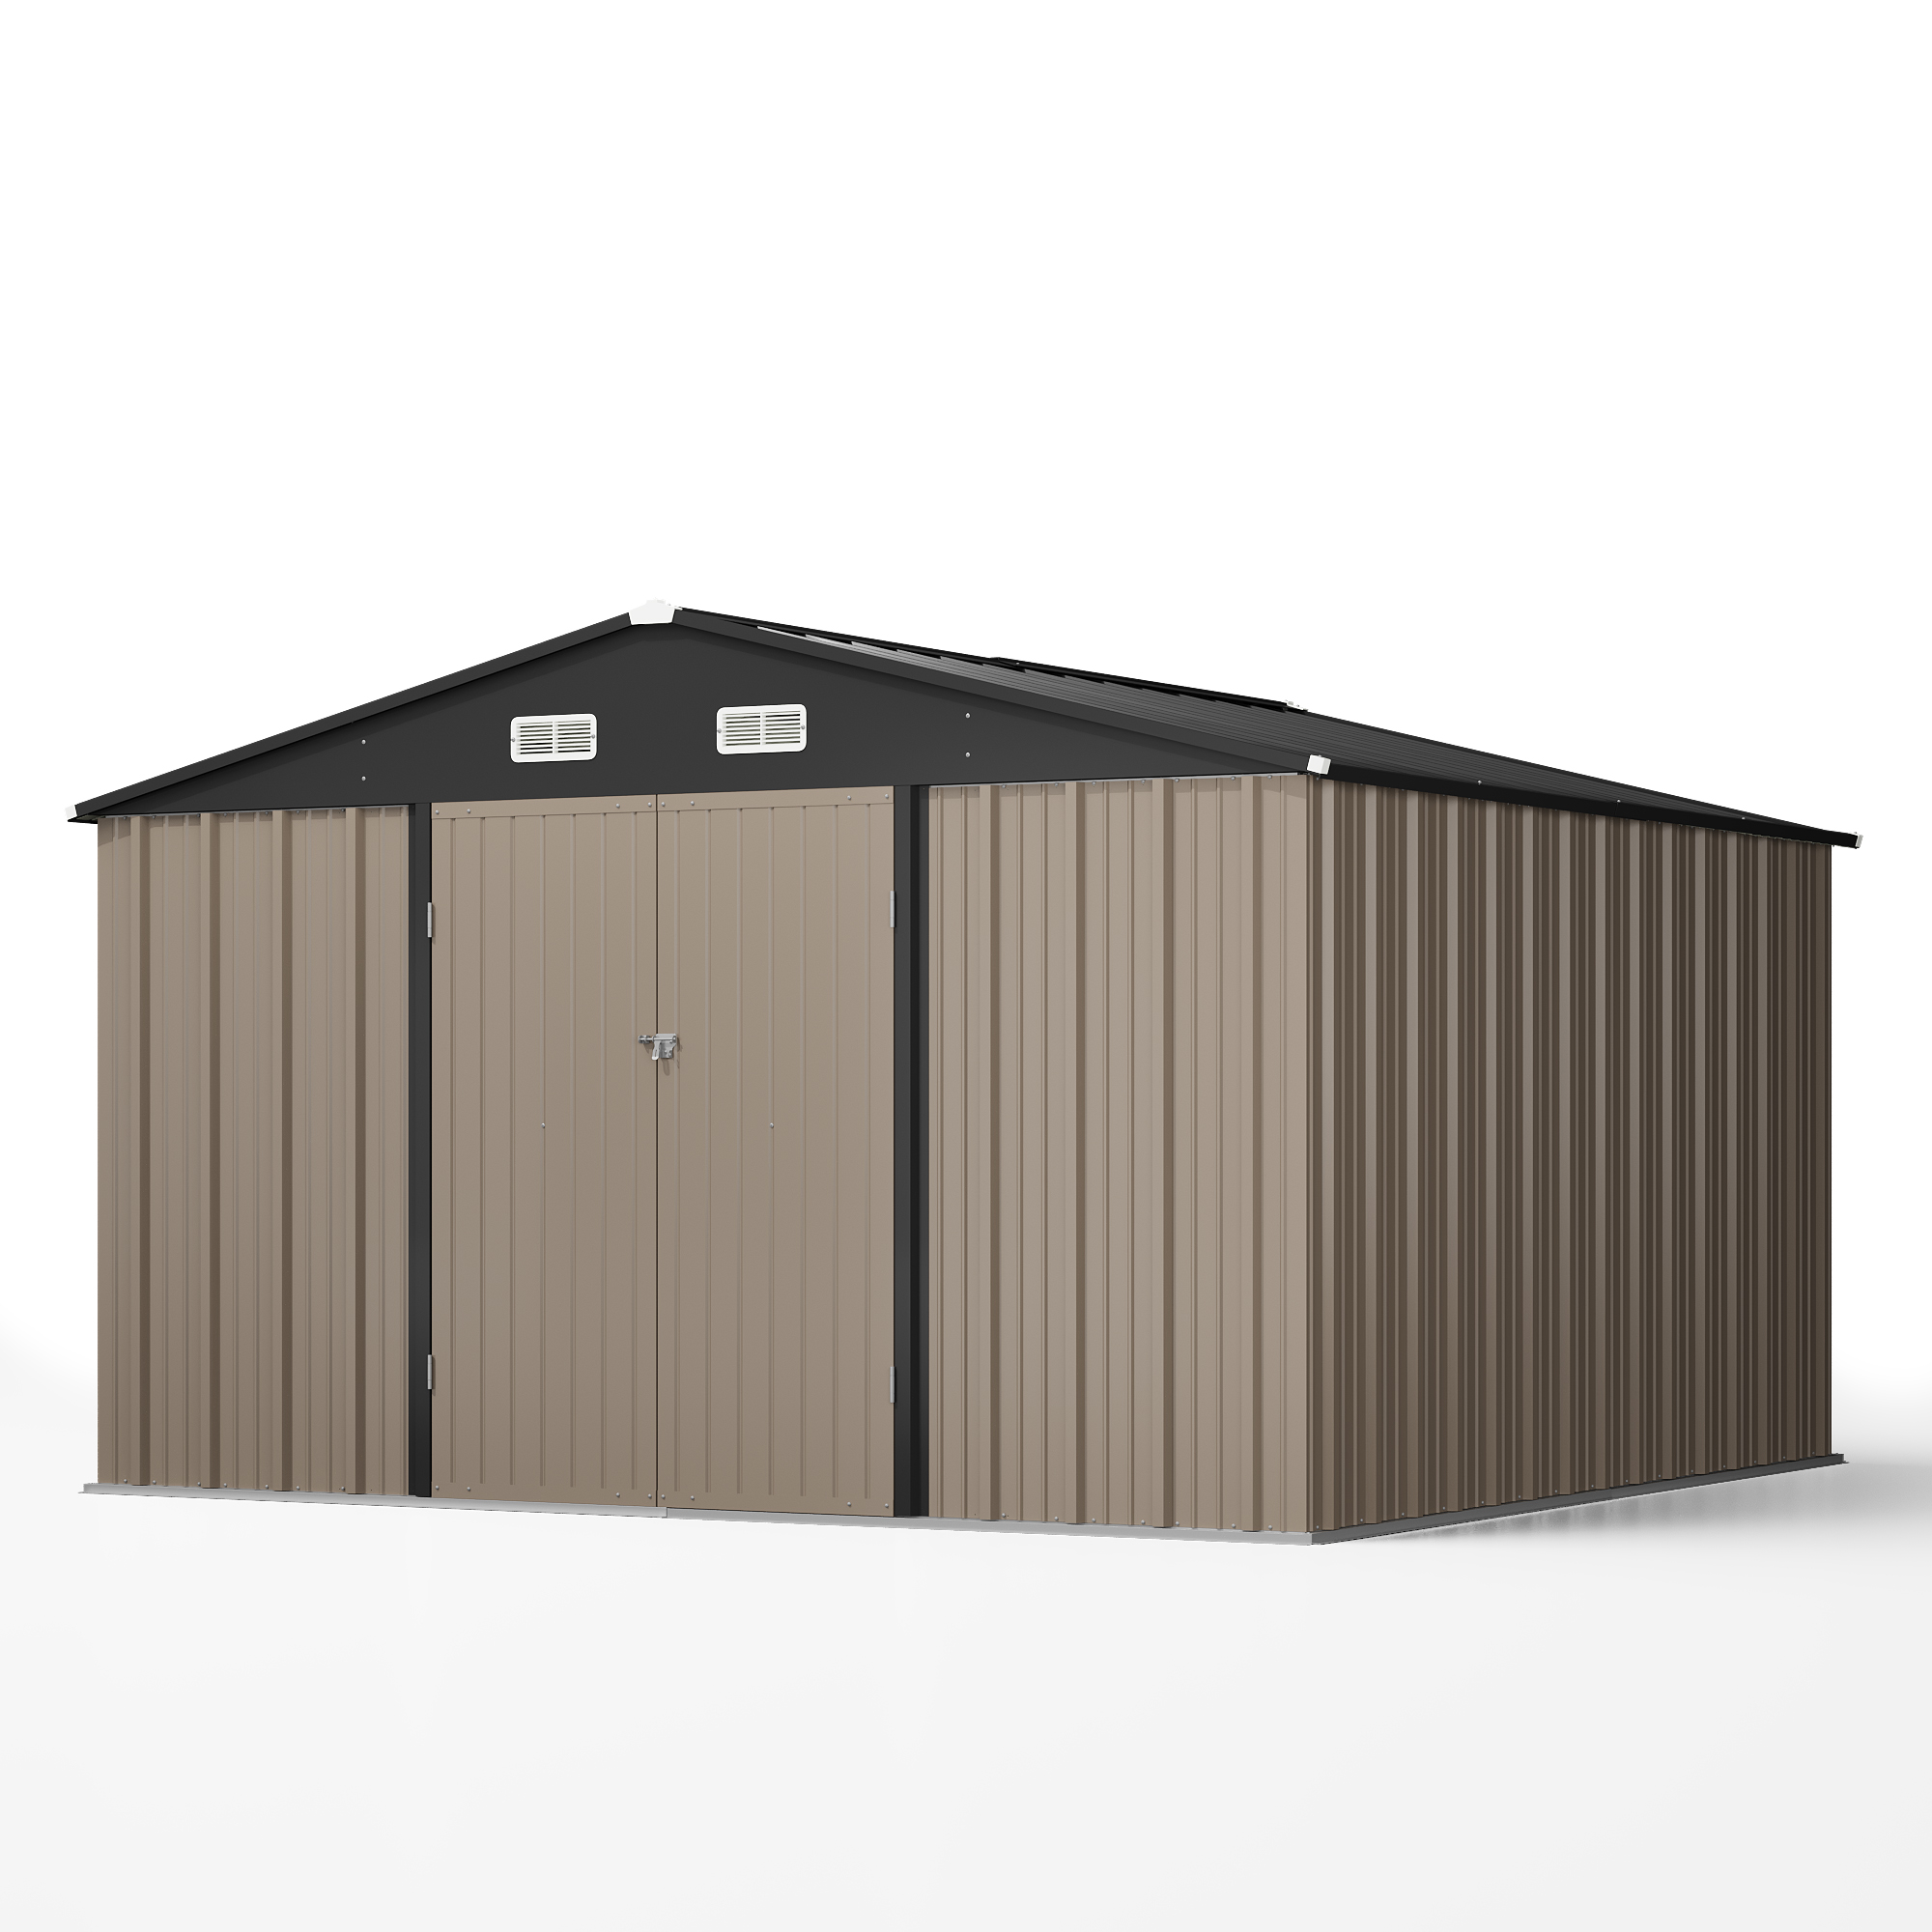 Patiowell Size Upgrade 10 x 10 ft Outdoor Storage Metal Shed with Sloping Roof and Double Lockable Door, Brown - image 3 of 7